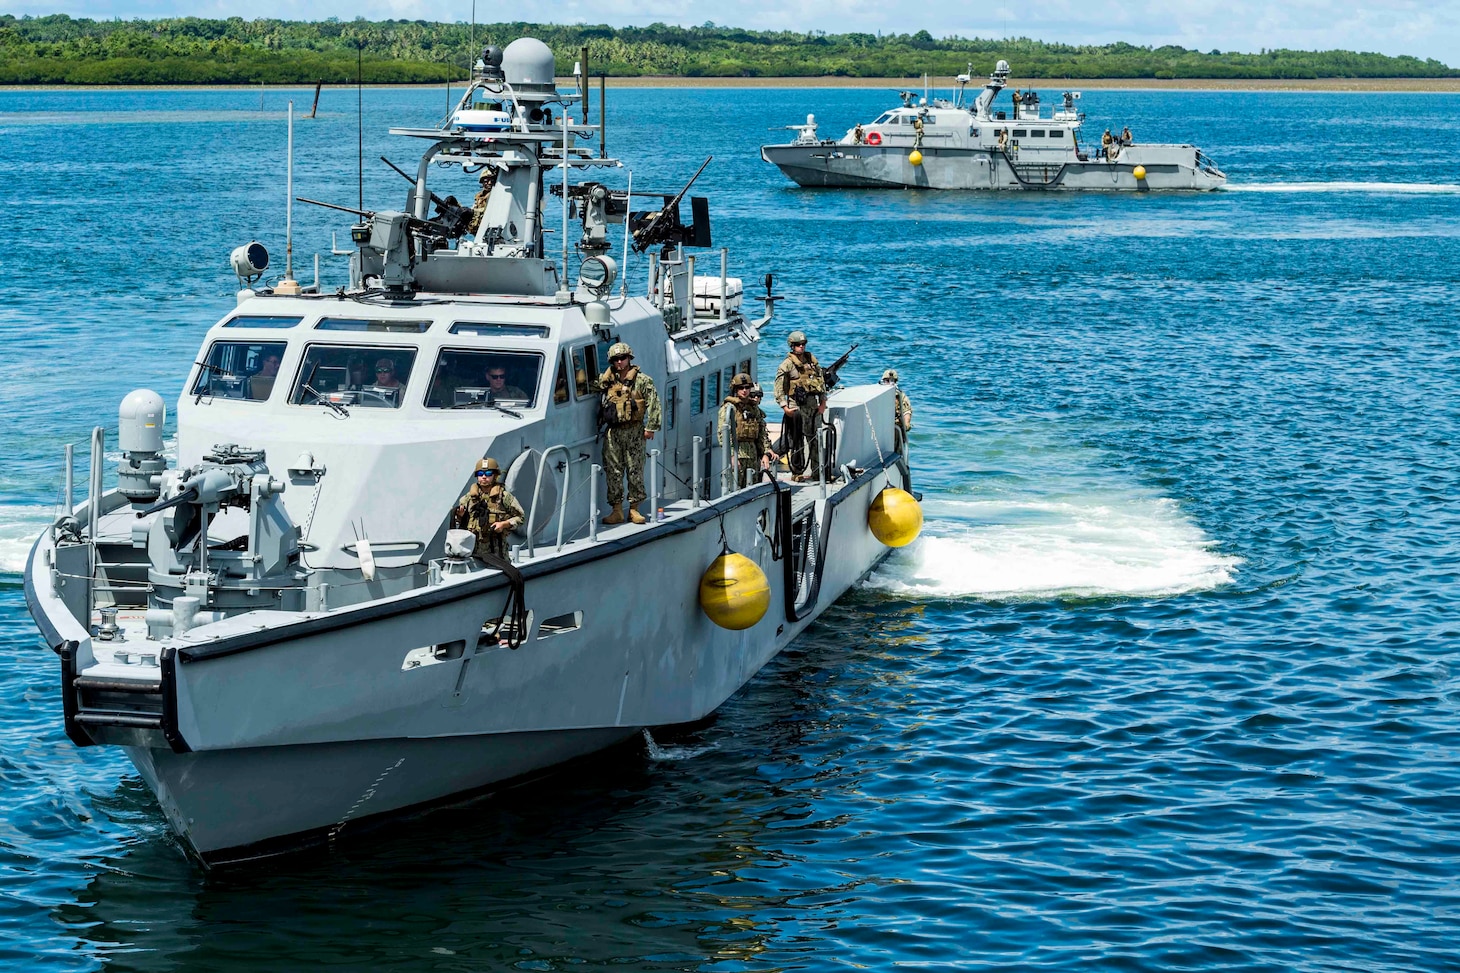 COLONIA, Yap (July 3, 2019) Mark VI patrol boats, assigned to Coastal Riverine Squadron (CRS) 2, Coastal Riverine Group 1, Det. Guam, arrive to Colonia, Yap. CRG 1, Det. Guam's visit to Yap, and engagement with the People of Federated States of Micronesia underscores the U.S. Navy's commitment to partners in the region. The Mark VI patrol boat is an integral part of the expeditionary forces support to 7th Fleet, capability of supporting myriad of missions throughout the Indo-Pacific.